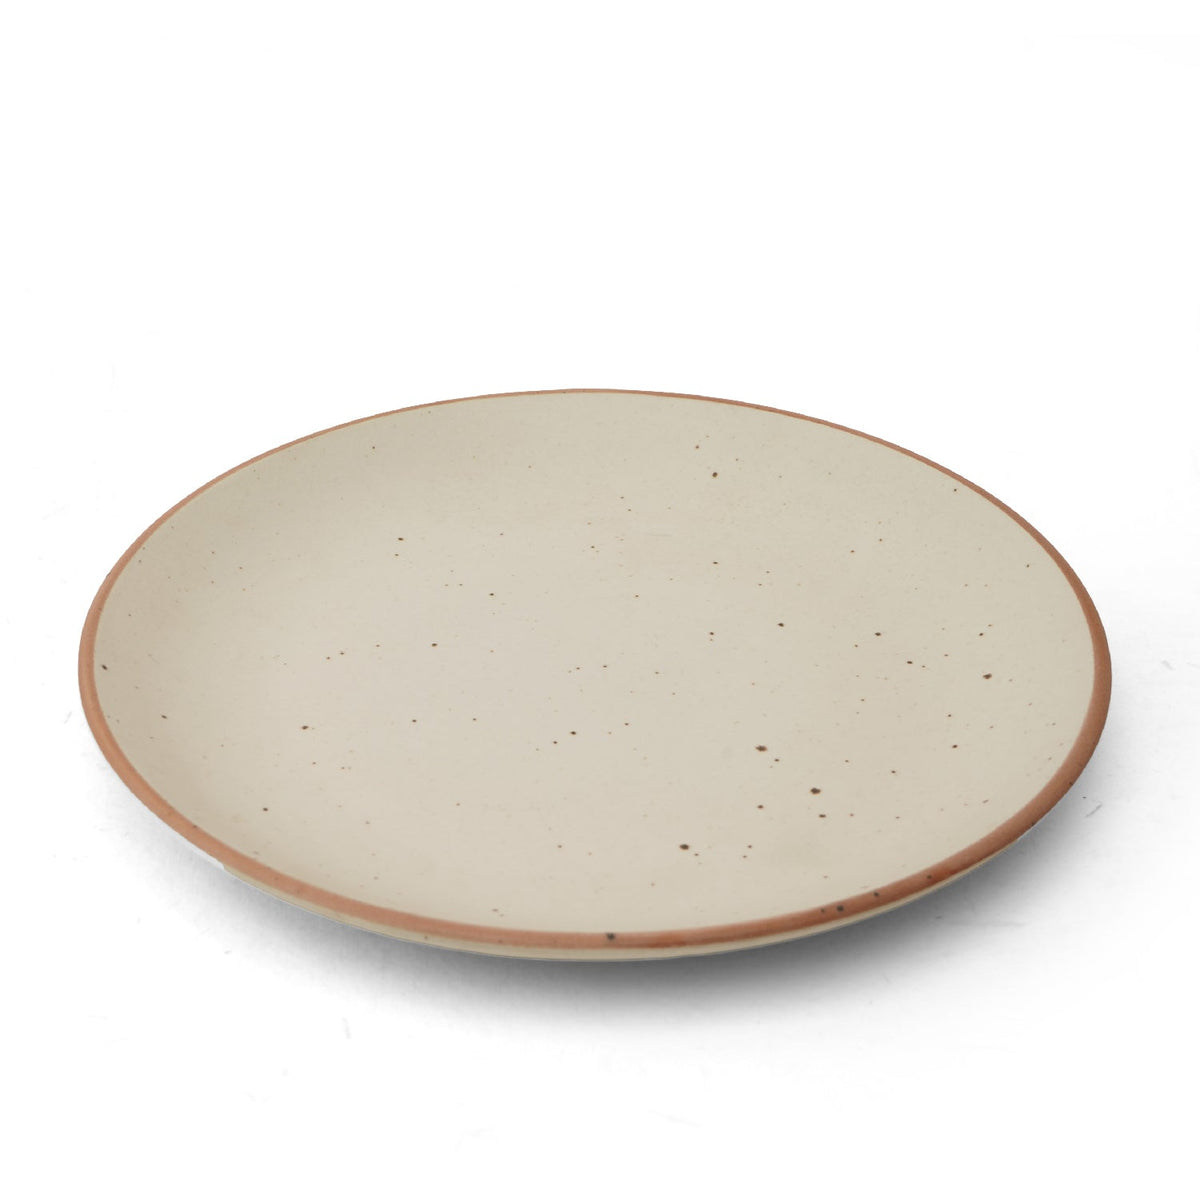 Claymistry Ceramic Dinner Plate Combo | Set of 2 | Biege with brown dots and borders (10 inch) | Ceramic Combos | Dinner Plates | Crockery | Dinnerware